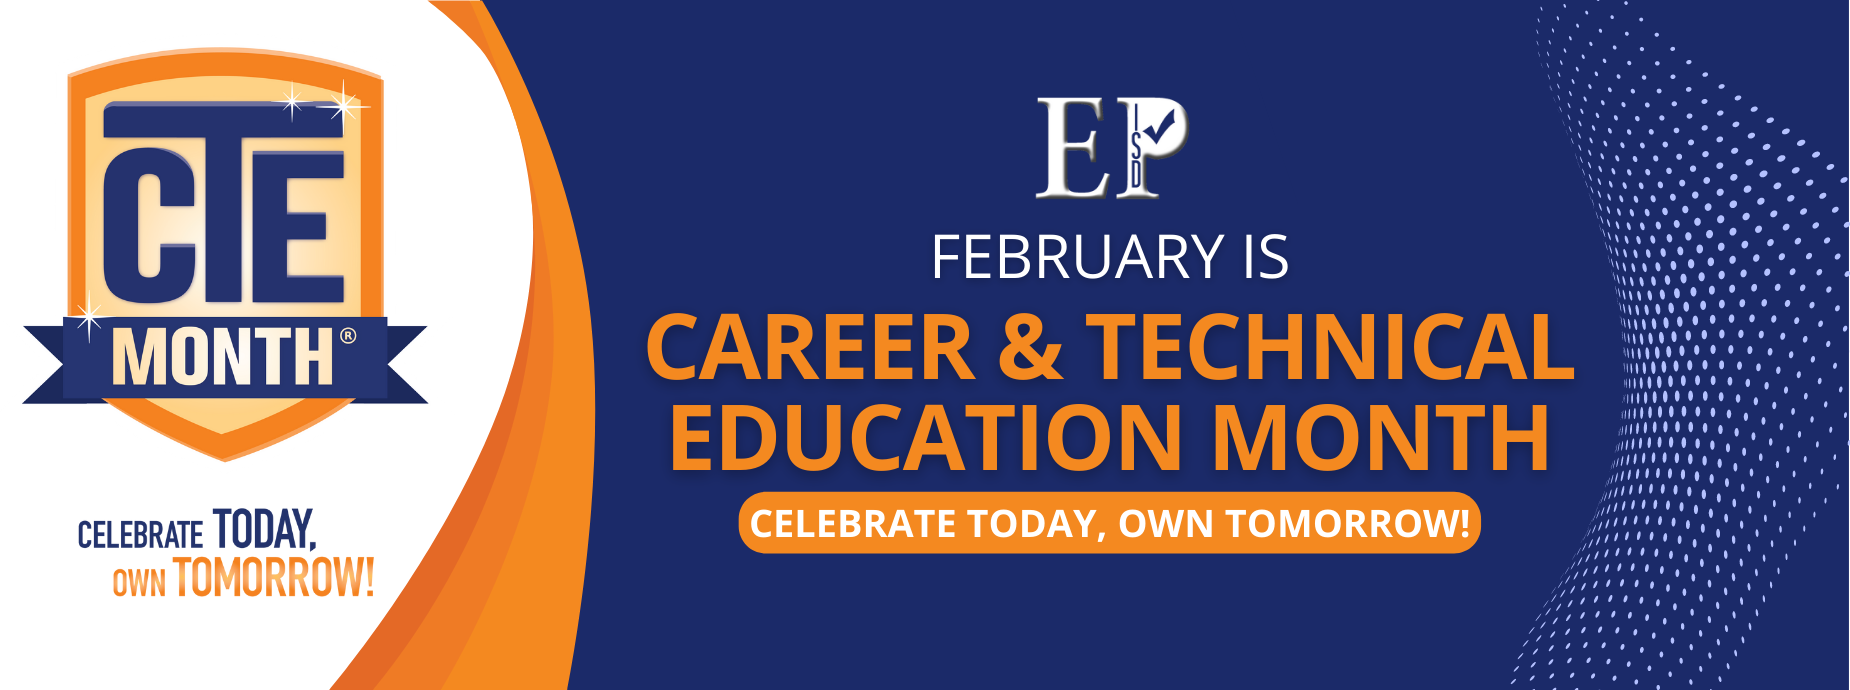 Career & Technical Education Month banner